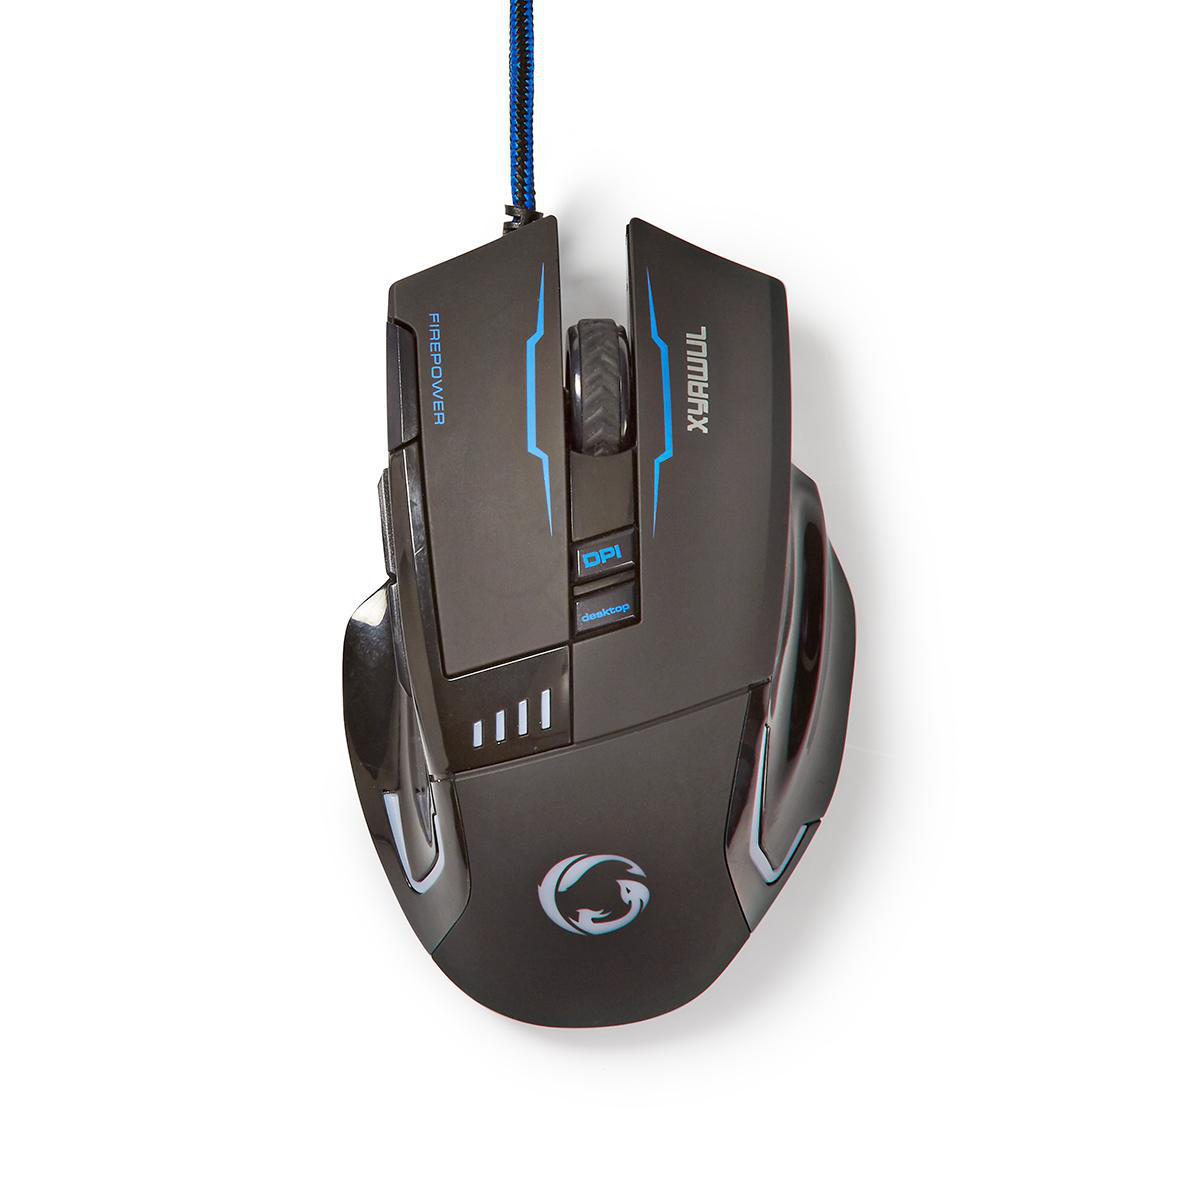 origin Pakistani feedback Gaming Mouse | Wired | DPI: 800 / 1600 / 2400 / 4000 dpi | Yes | Number of